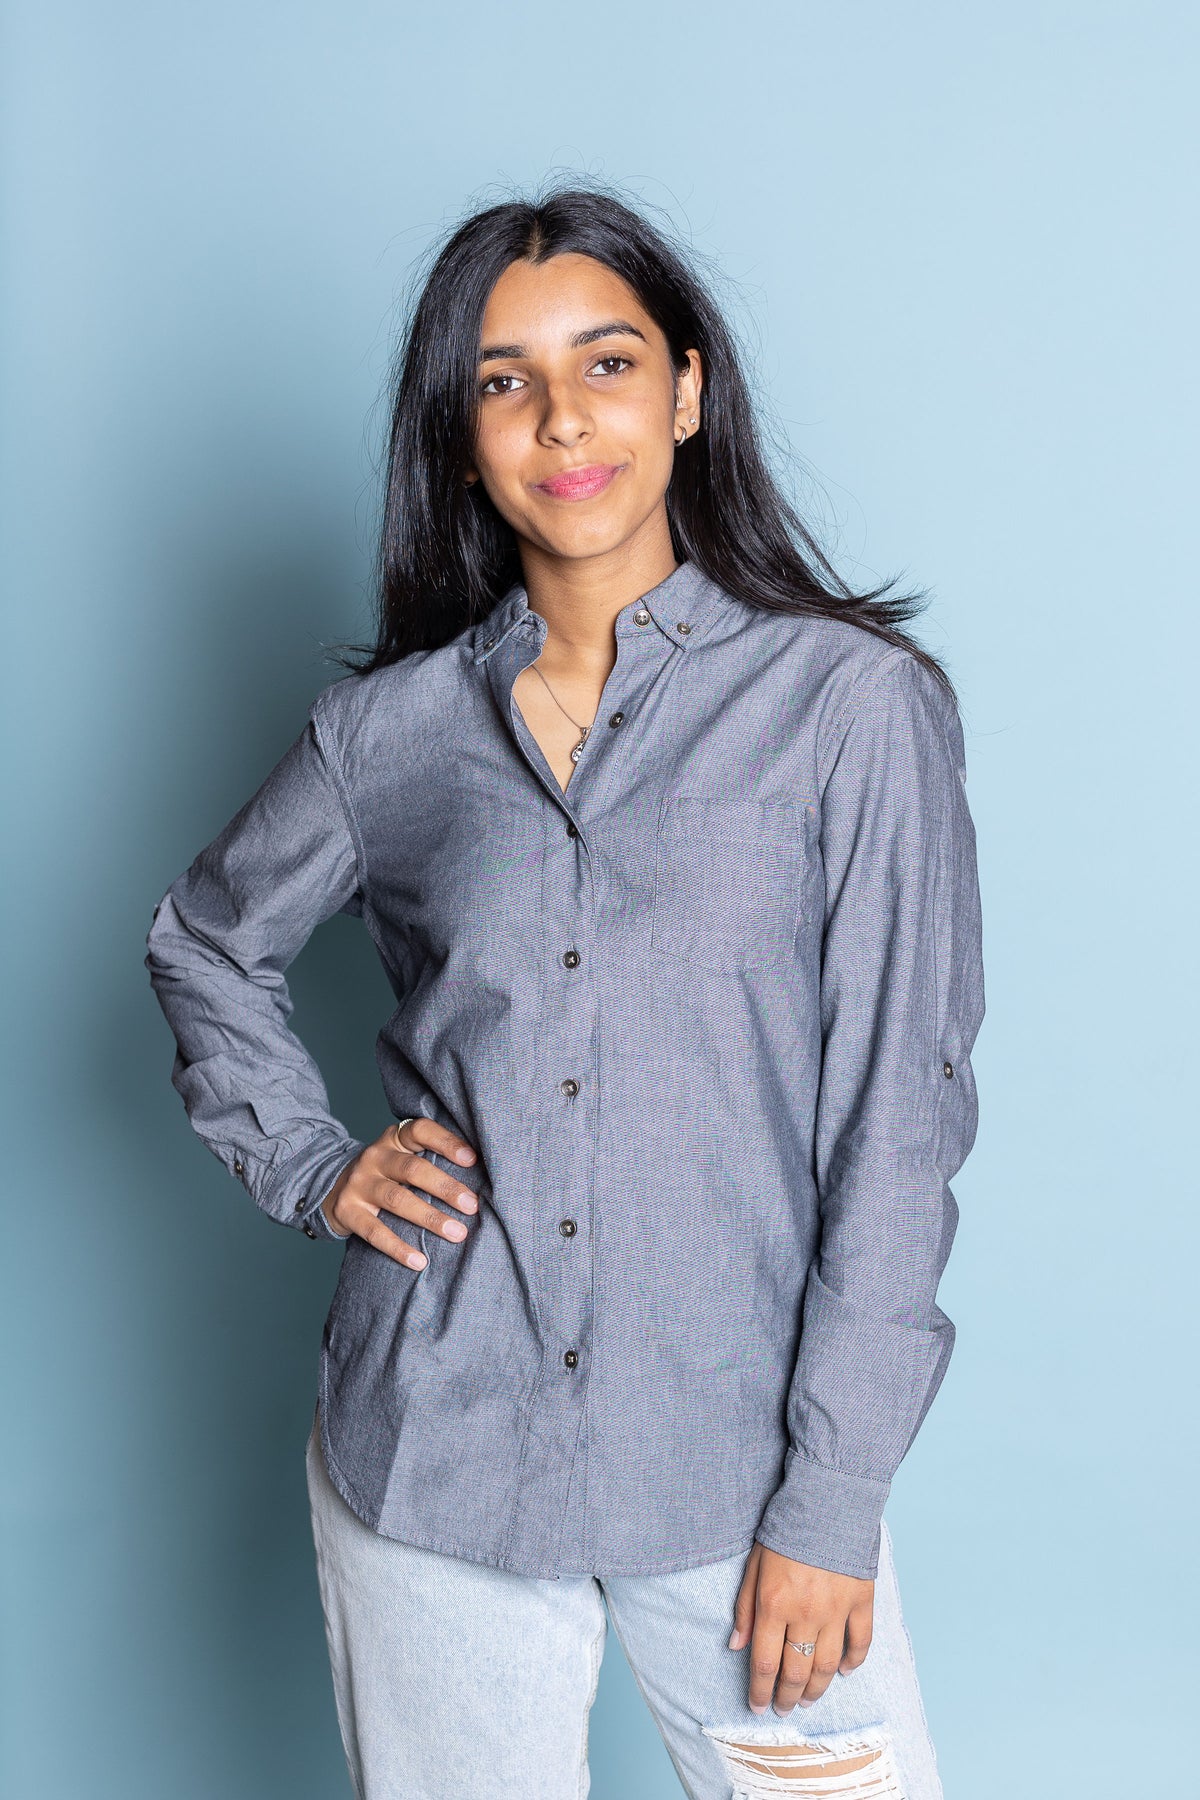 Female model with one hand on hips wearing greywacke Lucy Shirt against blue background